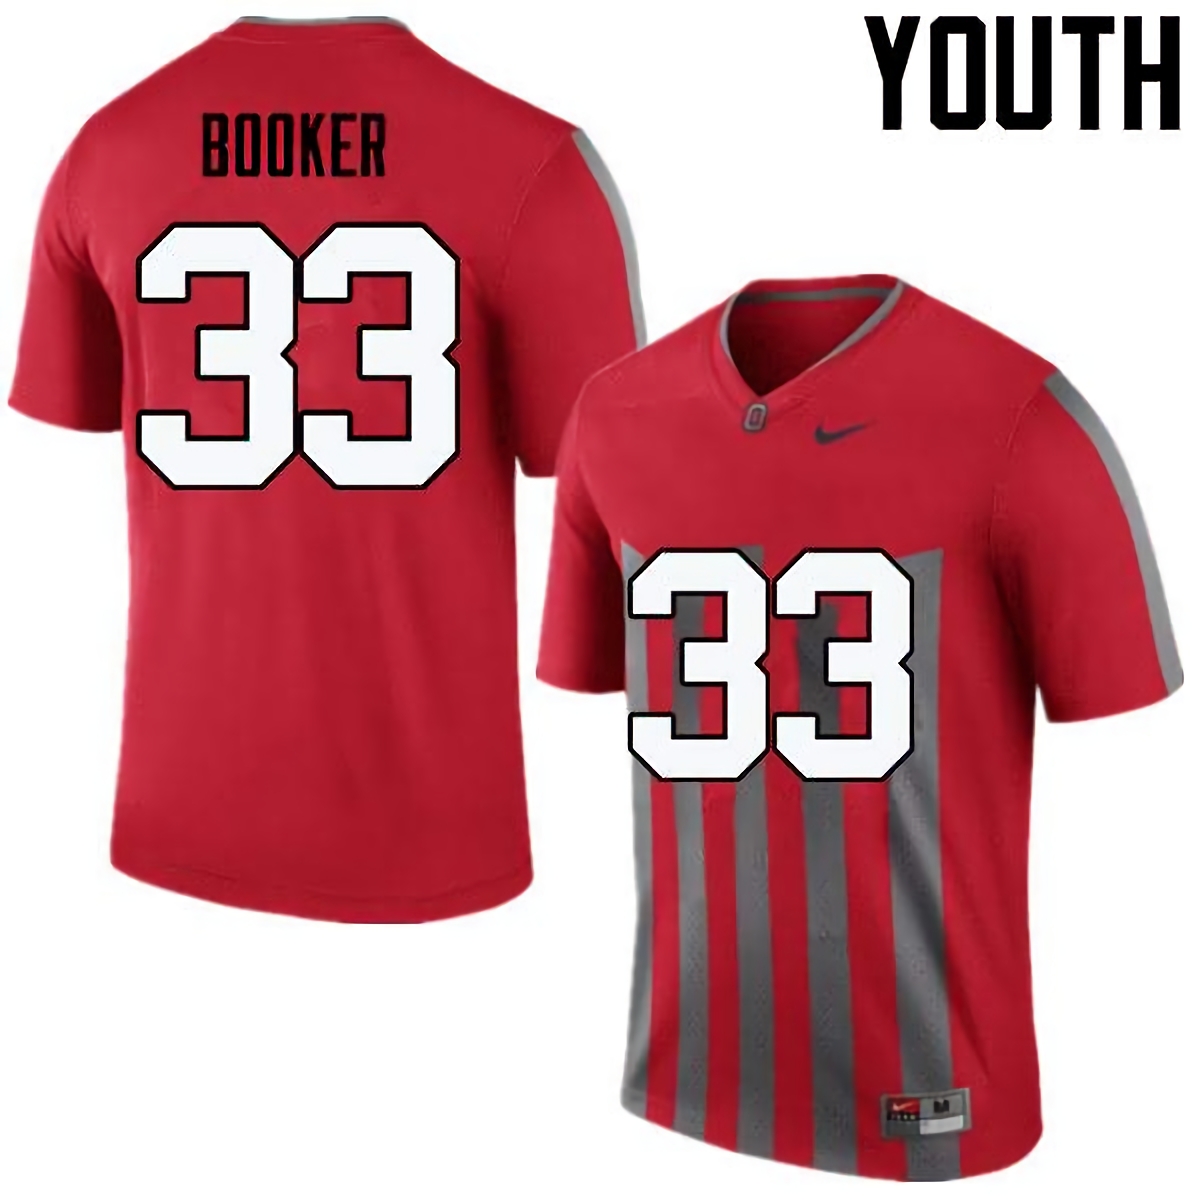 Dante Booker Ohio State Buckeyes Youth NCAA #33 Nike Throwback Red College Stitched Football Jersey VTJ8056UA